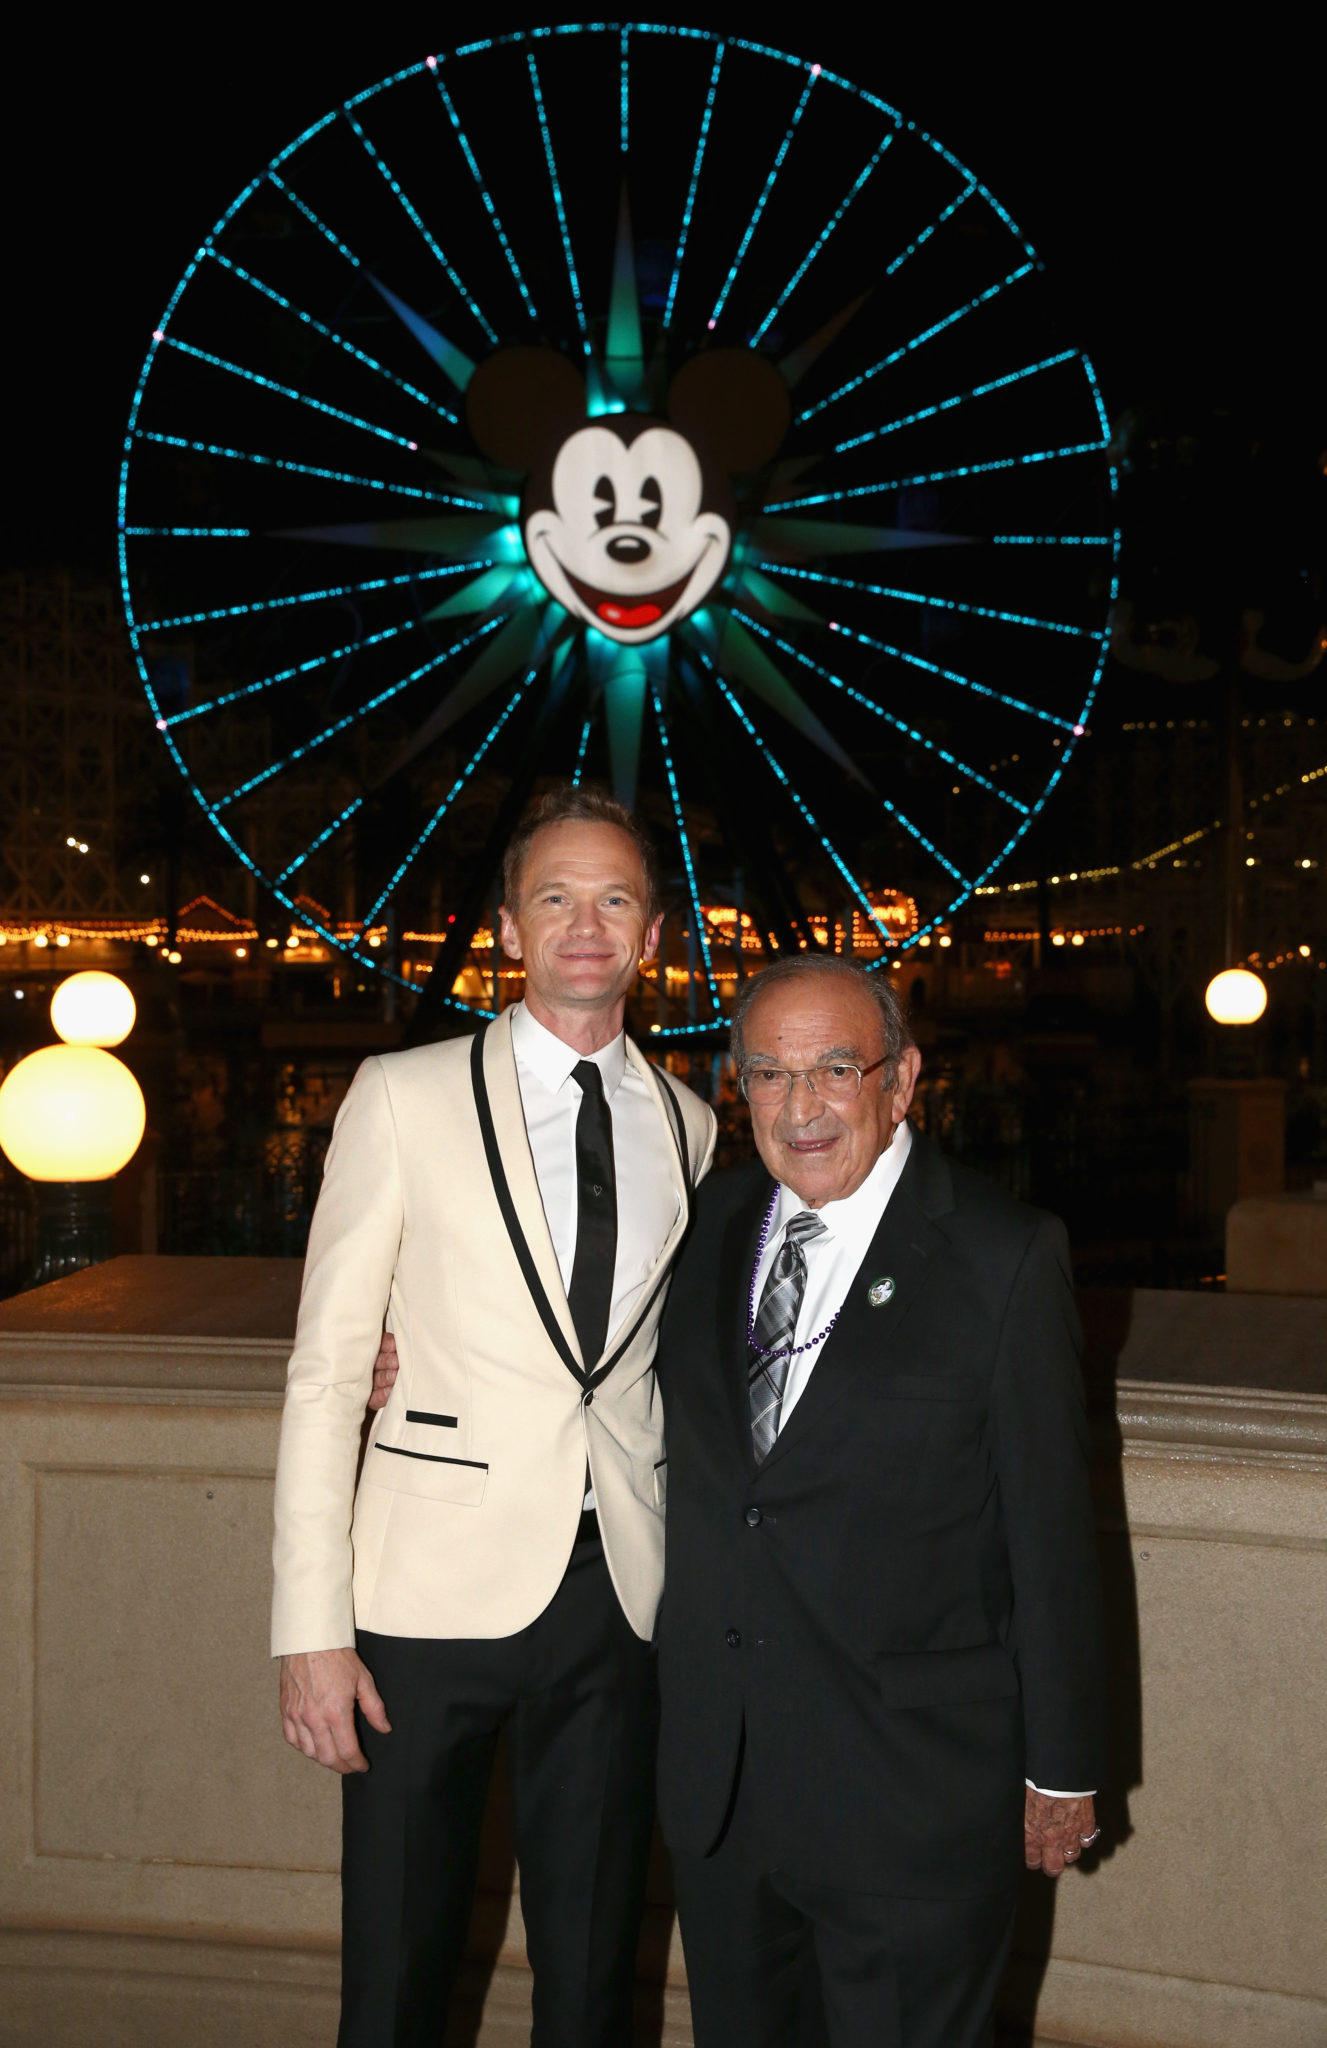 The Walt Disney Family Museum had its 2nd Annual Gala